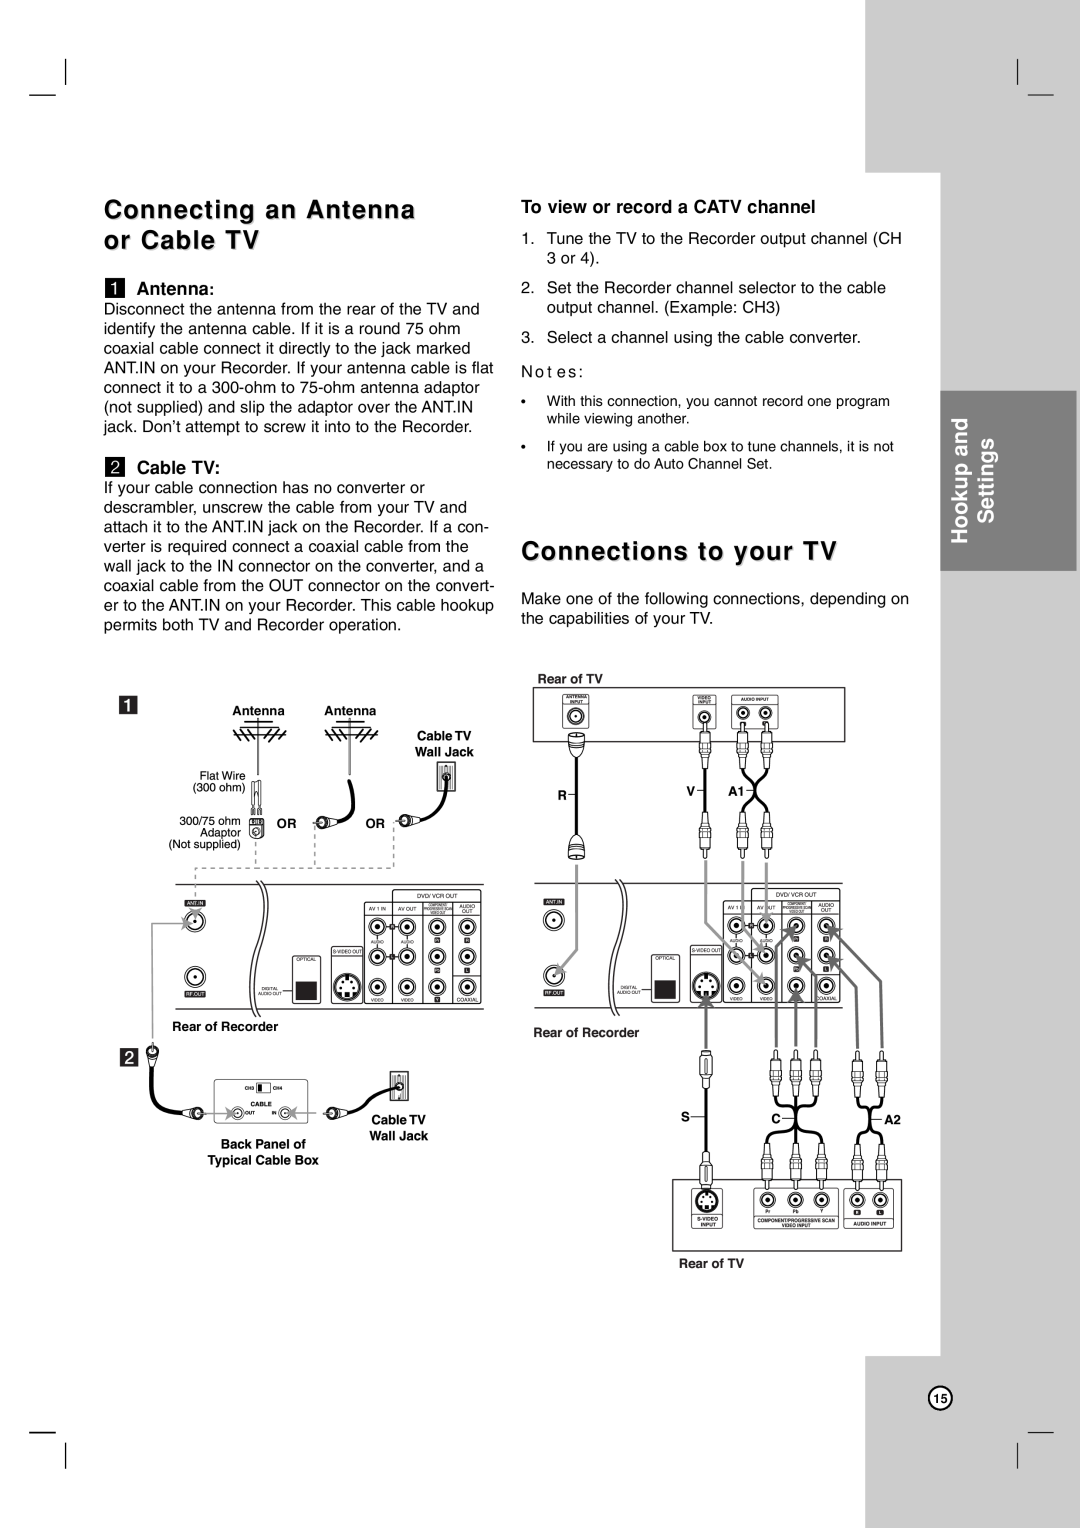 Zenith ZRY-316 Connecting an Antenna or Cable TV, Connections to your TV, Hookup and Settings, a Antenna, b Cable TV 